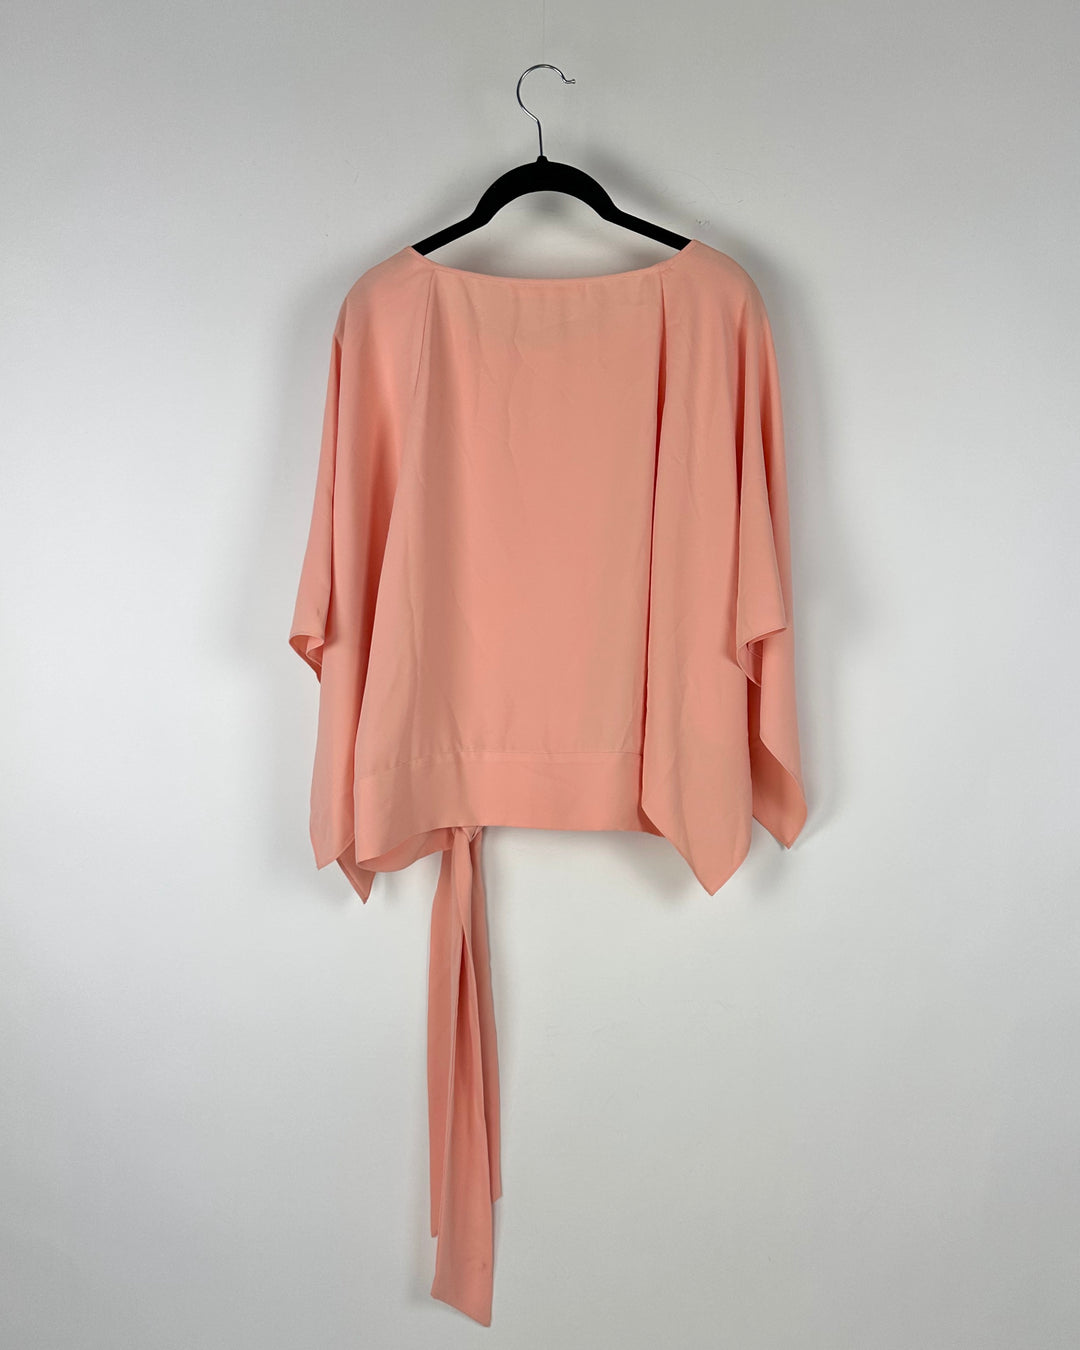 Peach Side Tie Top - Small